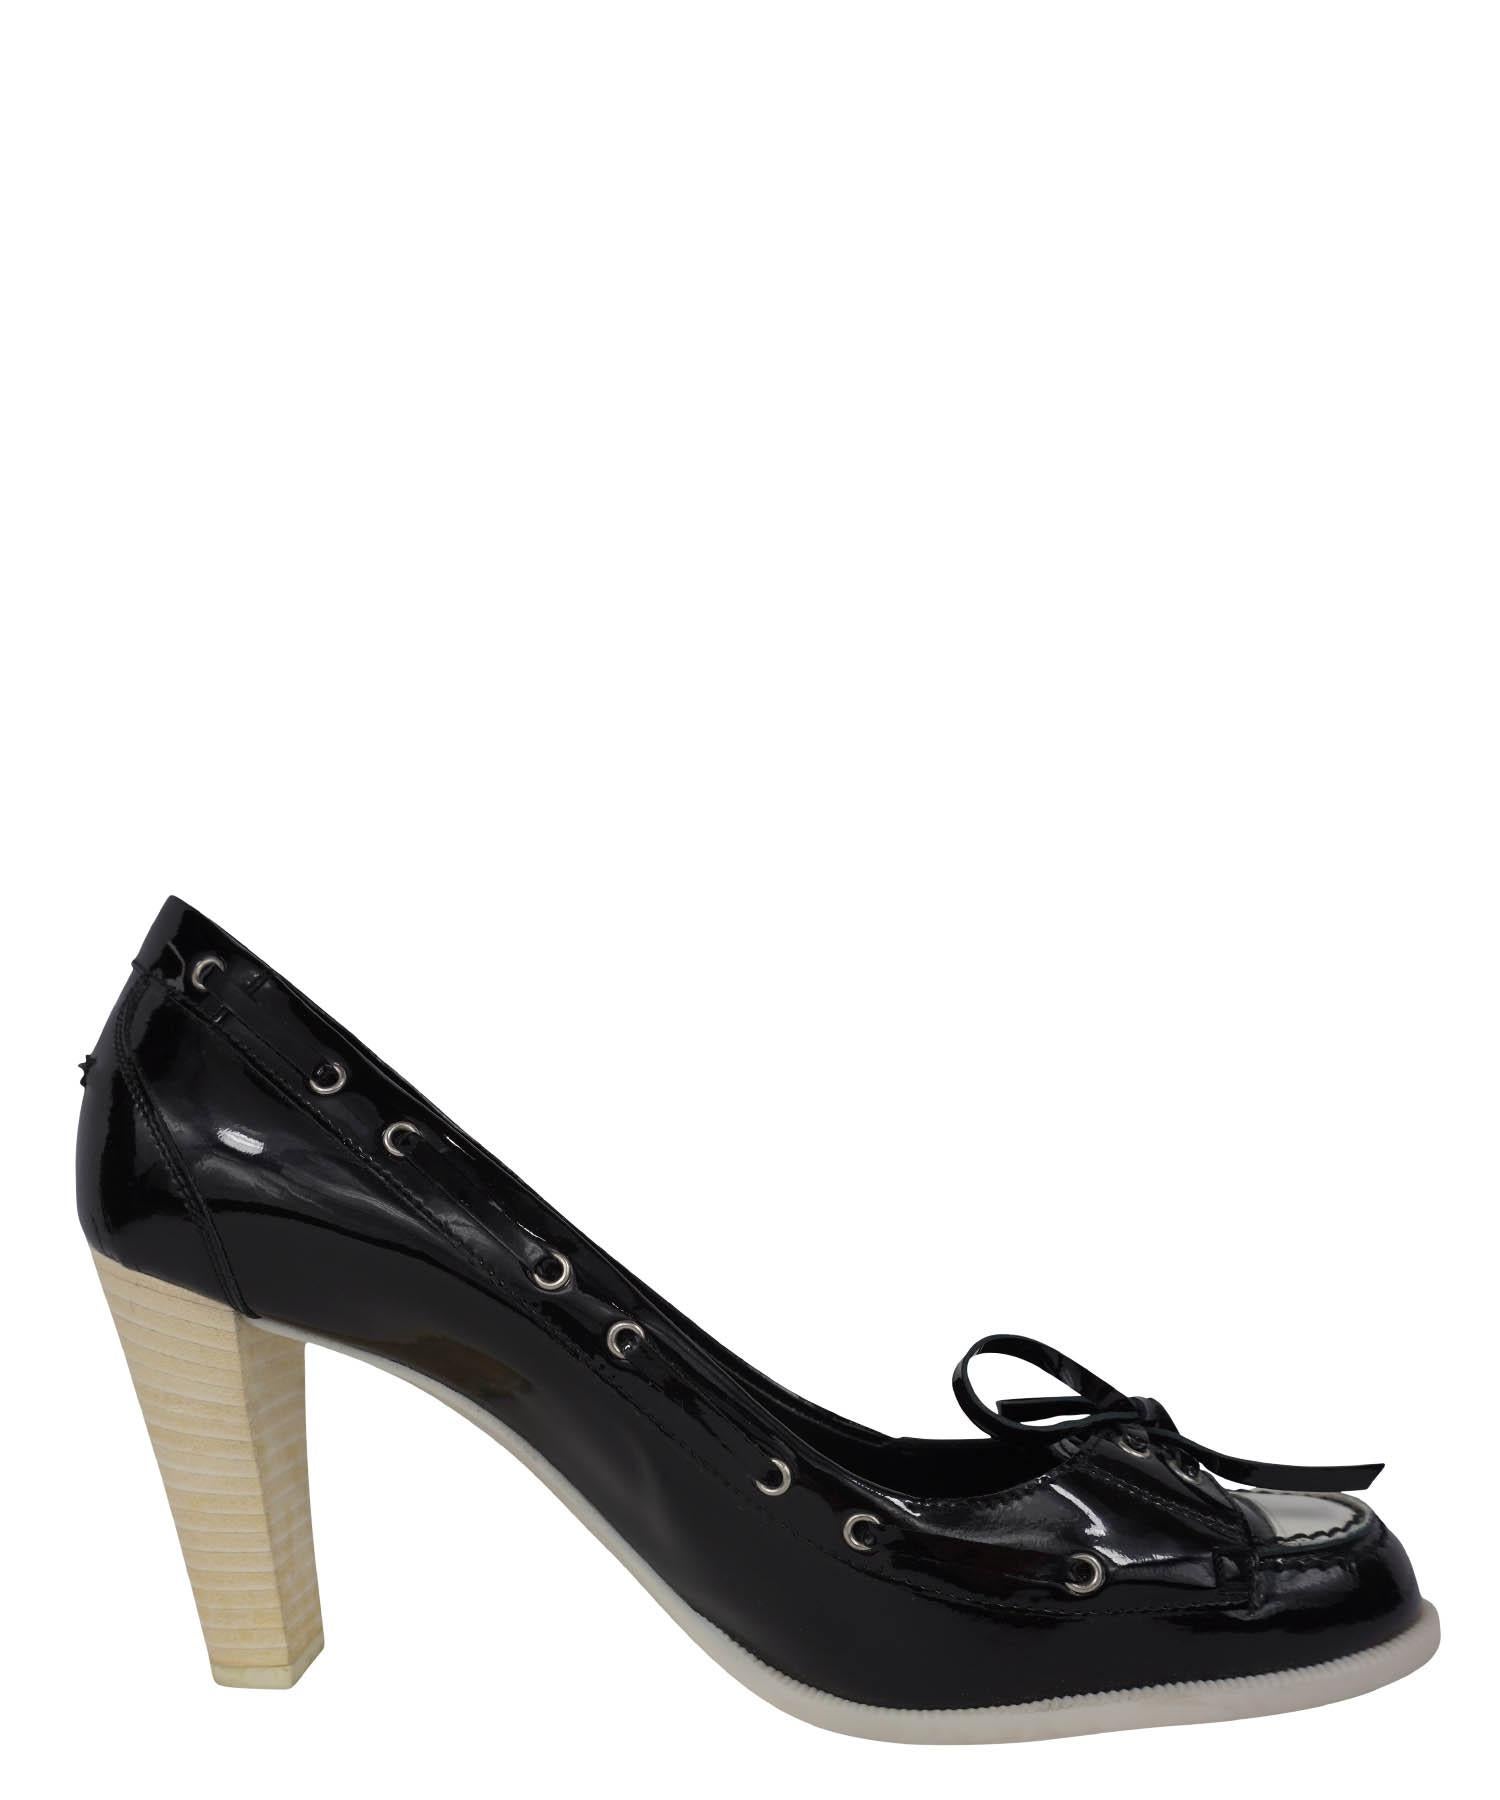 Chanel's unique take on a classic boating shoe dressed up with a high heel. These boat shoe pumps feature high heels, black patent leather with white cap toe uppers, white rubber soles, and laced ties at vamp. Designer size 38. Made in Italy. Minor